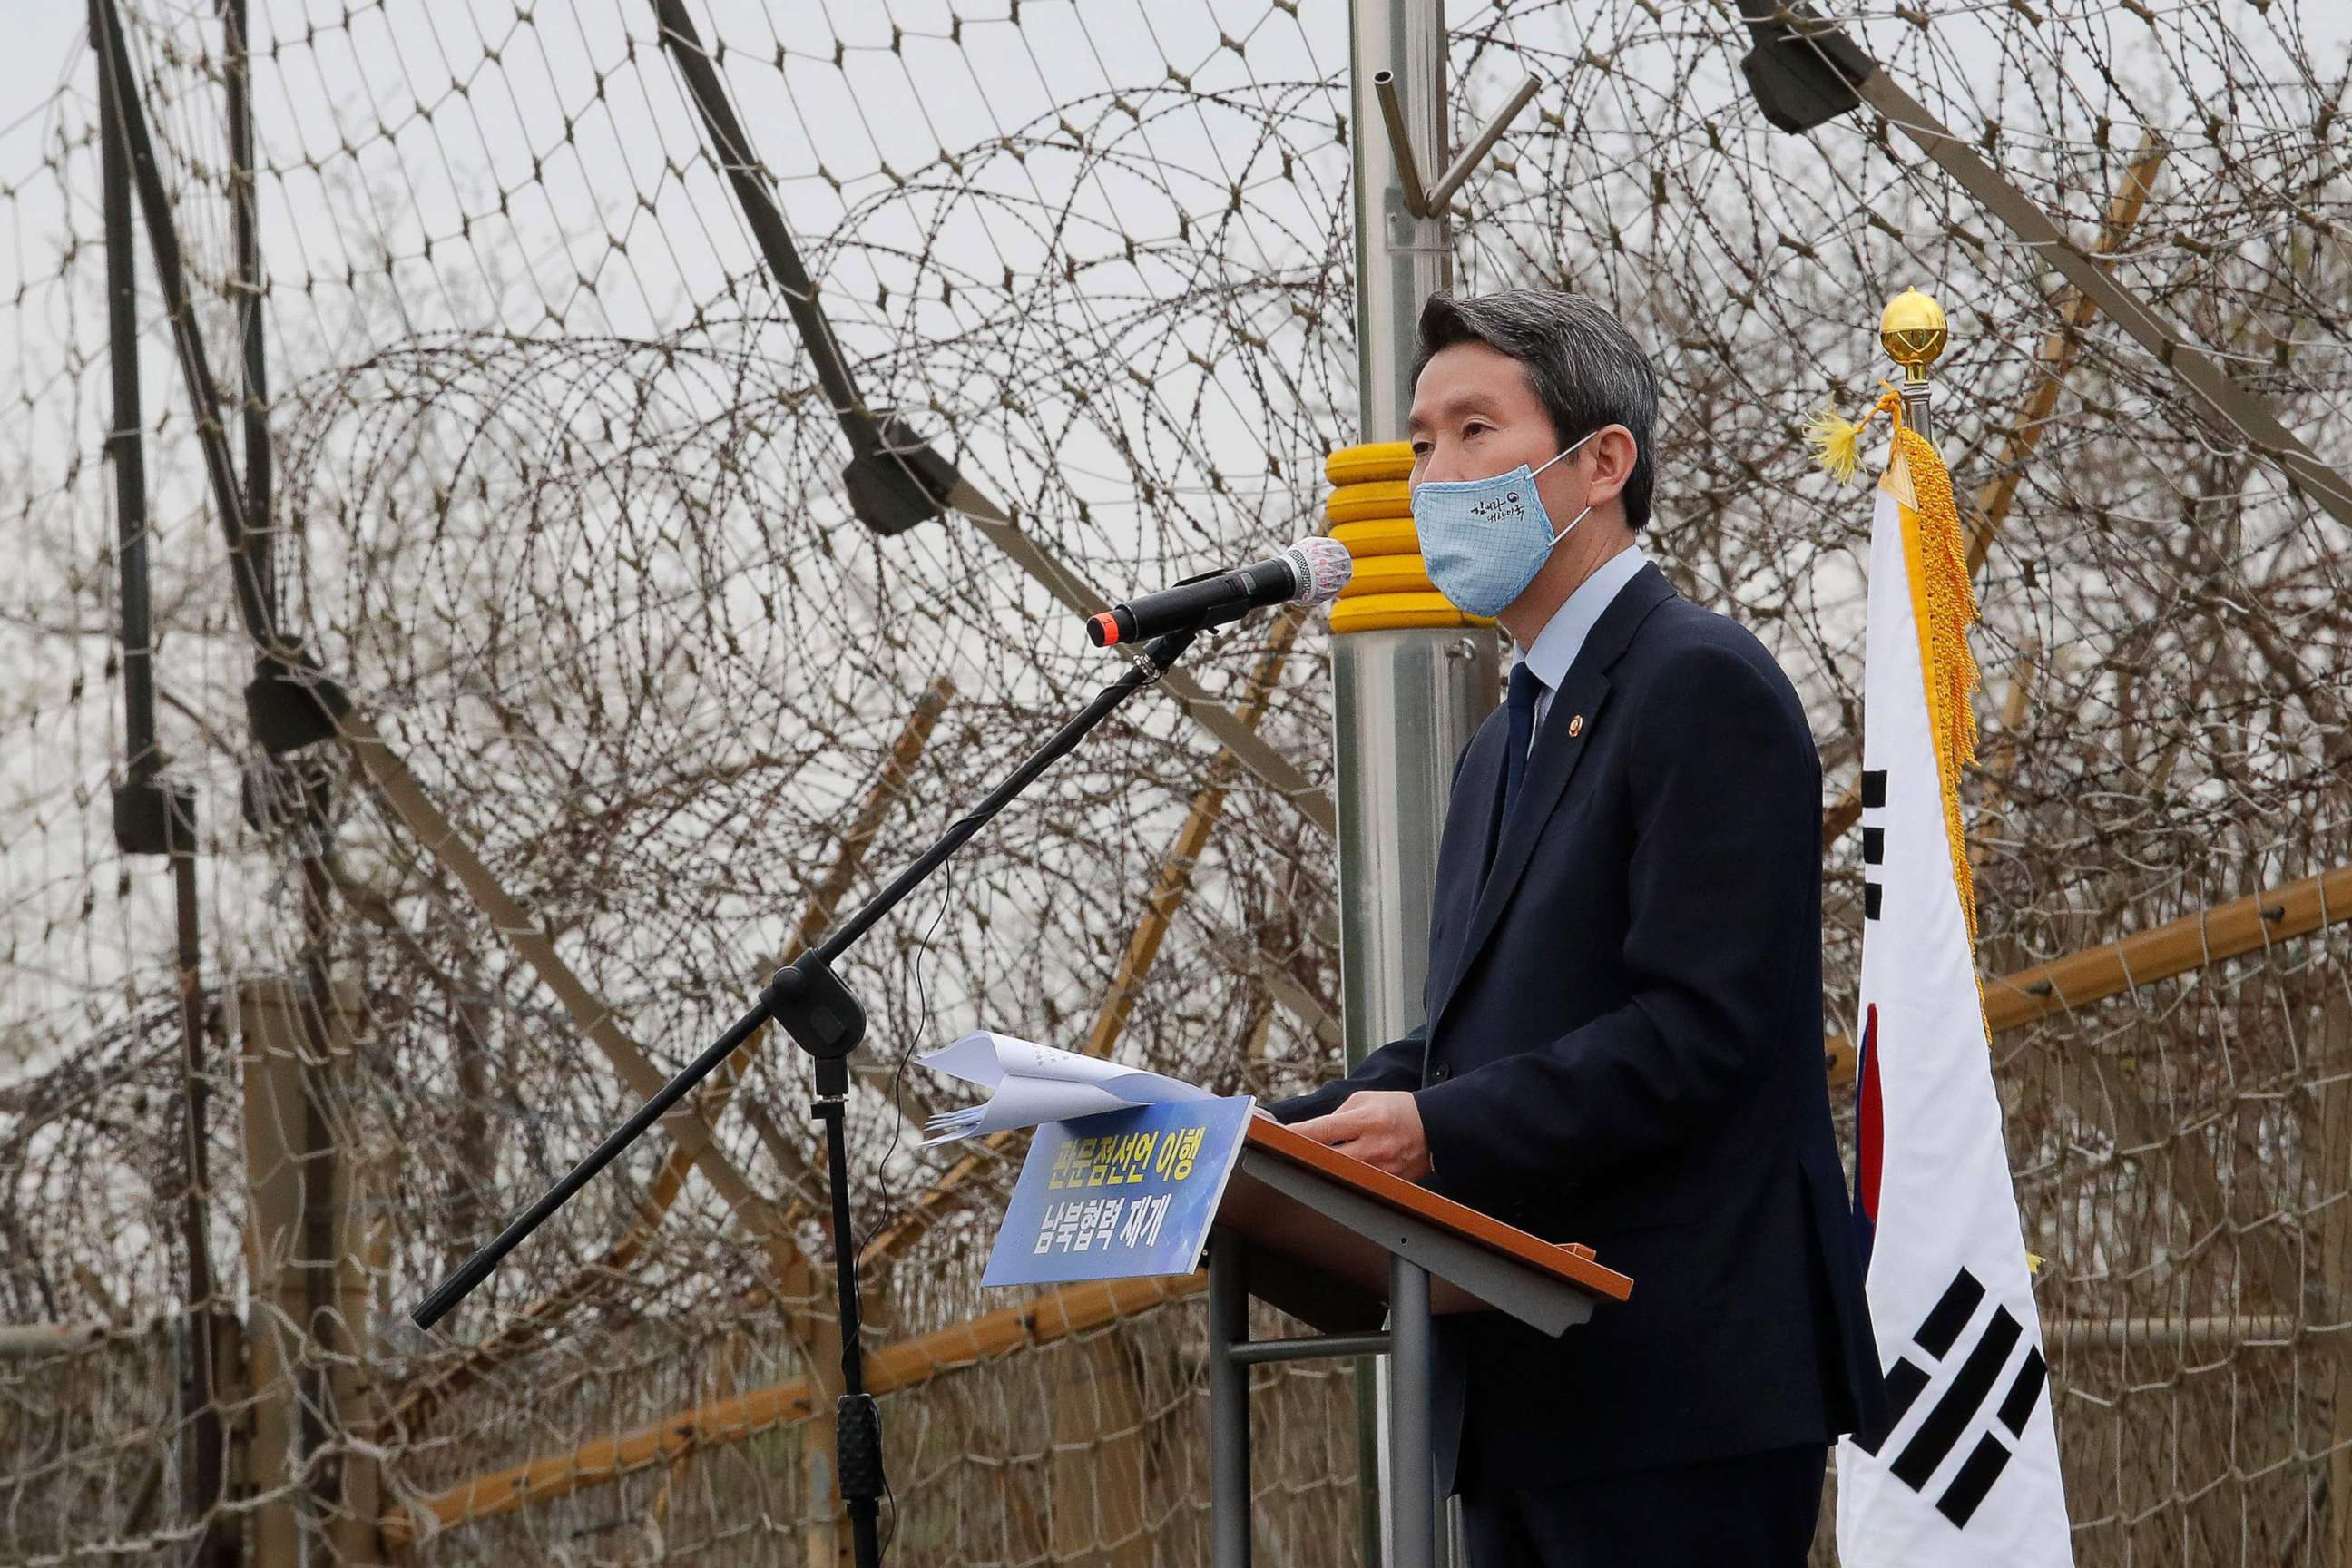 PHOTO: South Korean Unification Minister Lee In-young speaks during a ceremony in Paju on April 27, 2021.